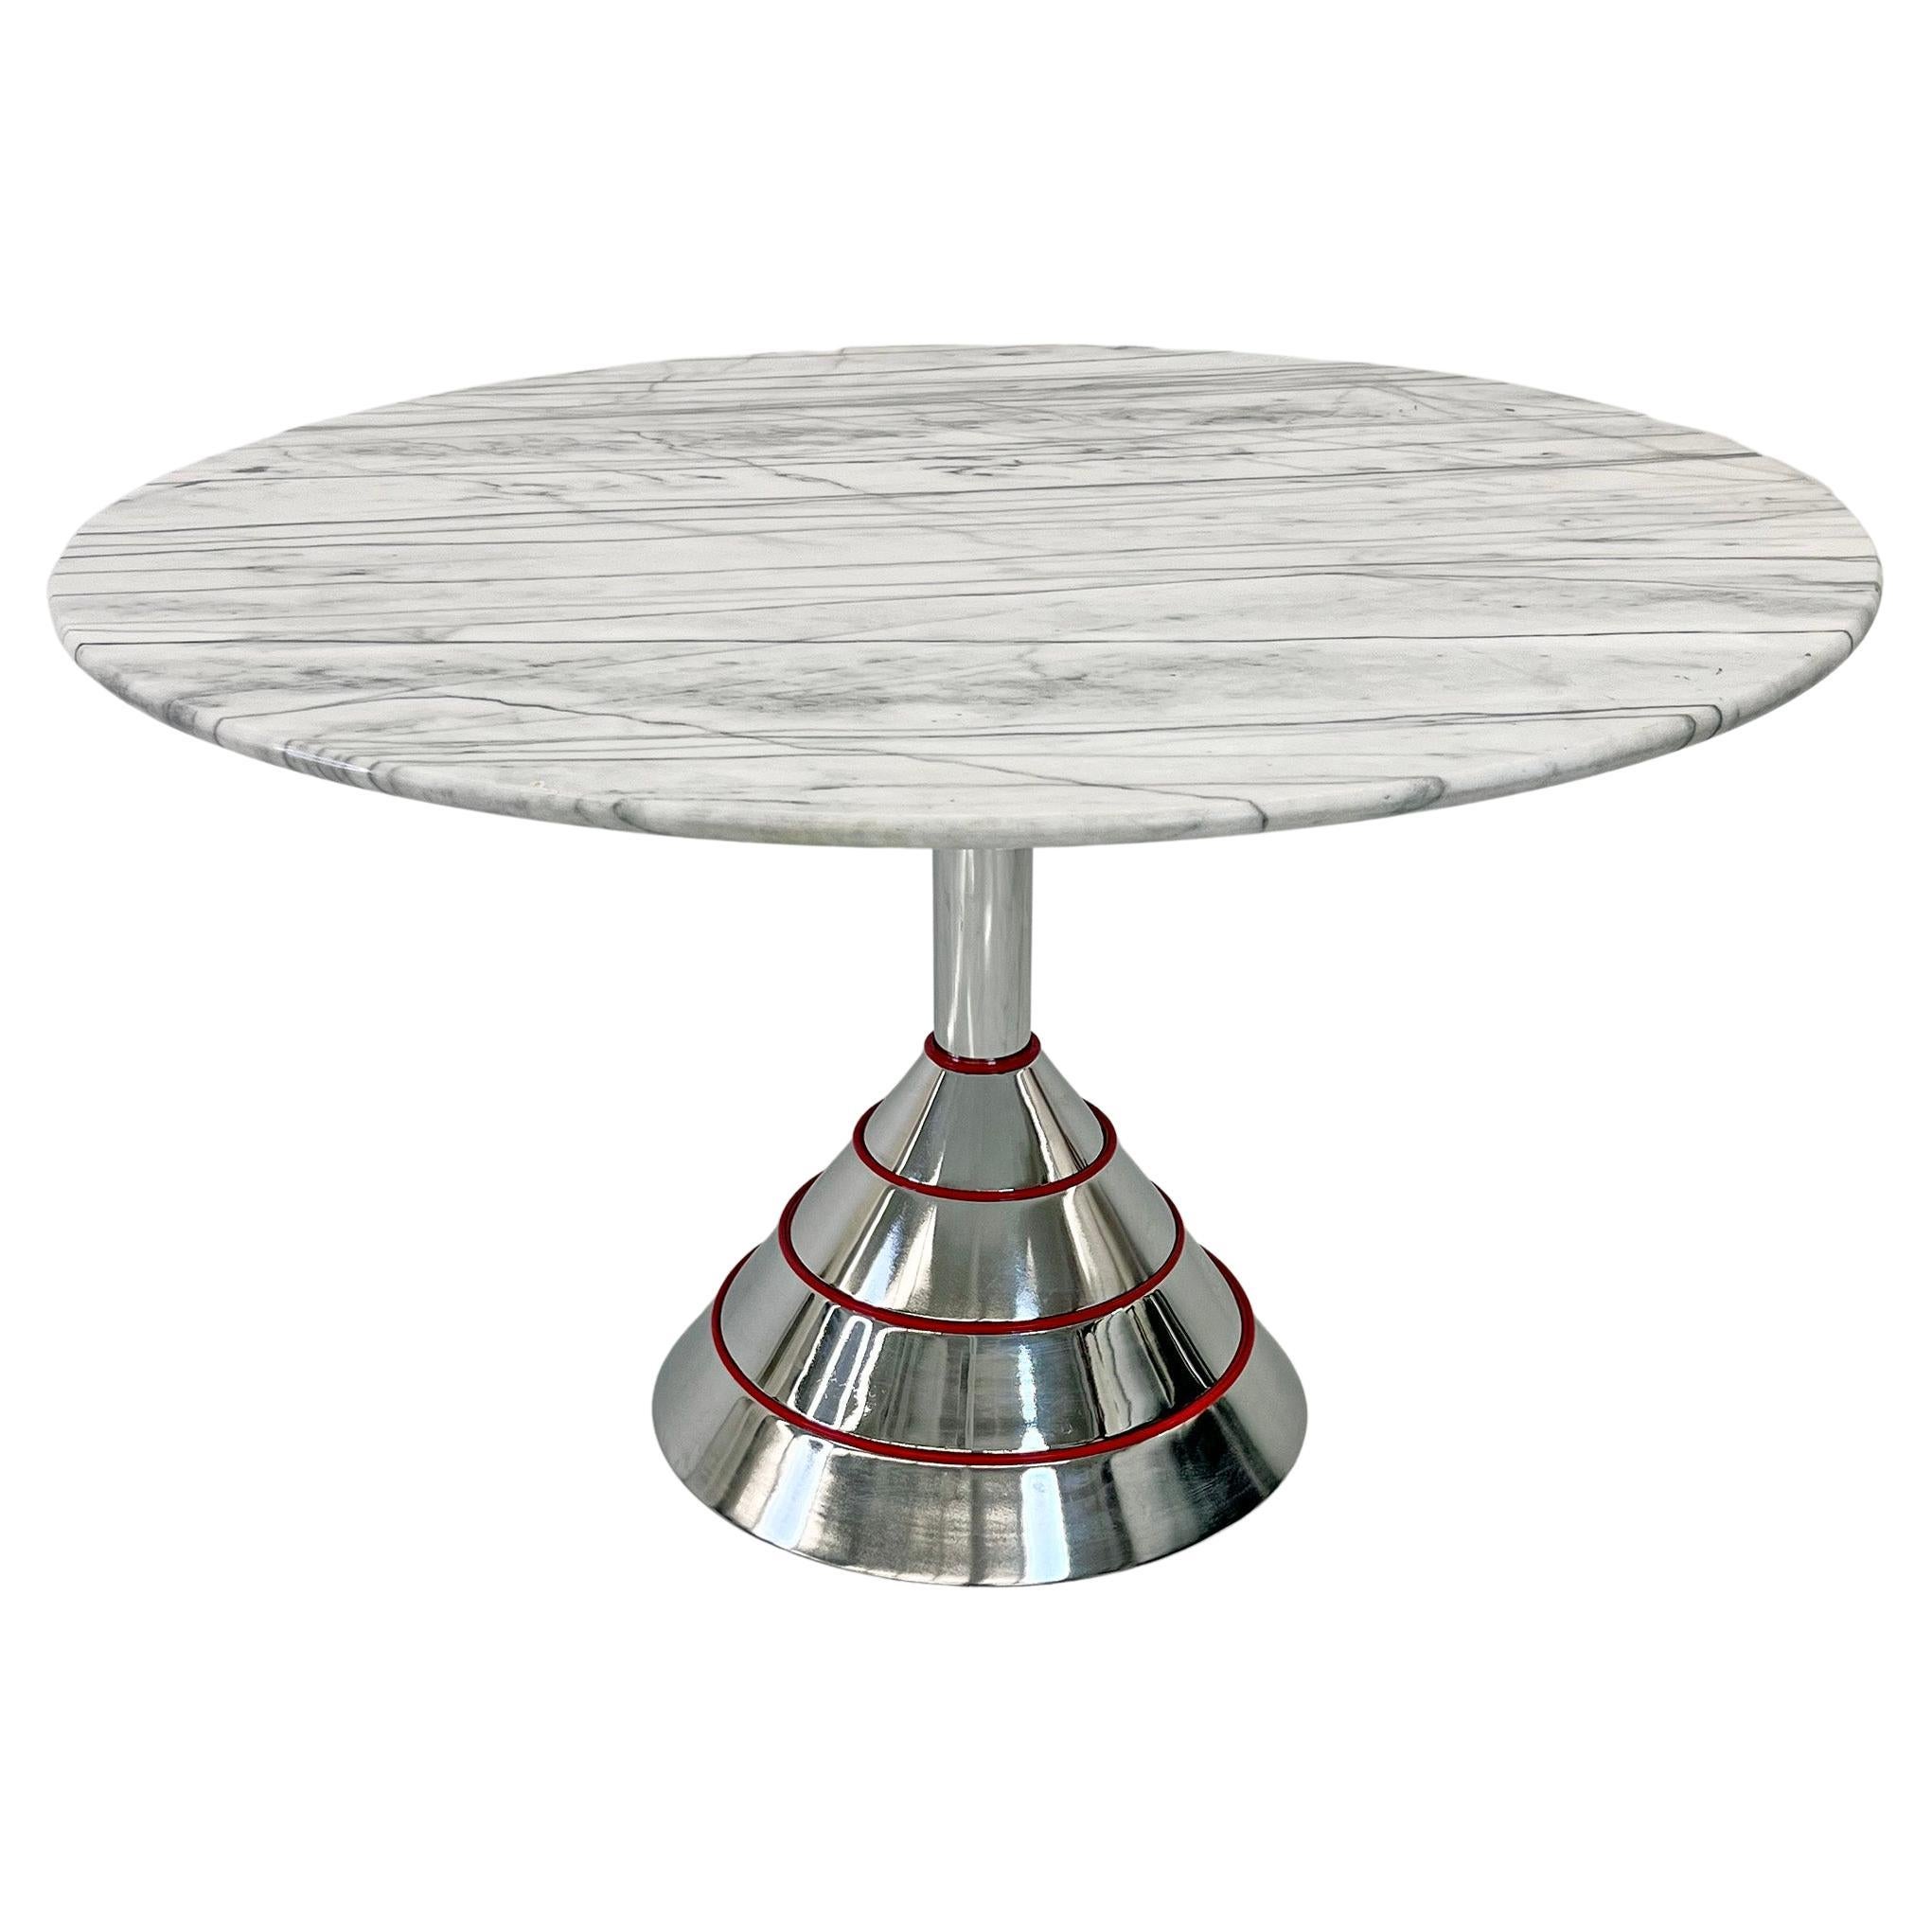 1980s Post Modern Memphis Milano Style Dining Table, Carrara Marble Top For Sale